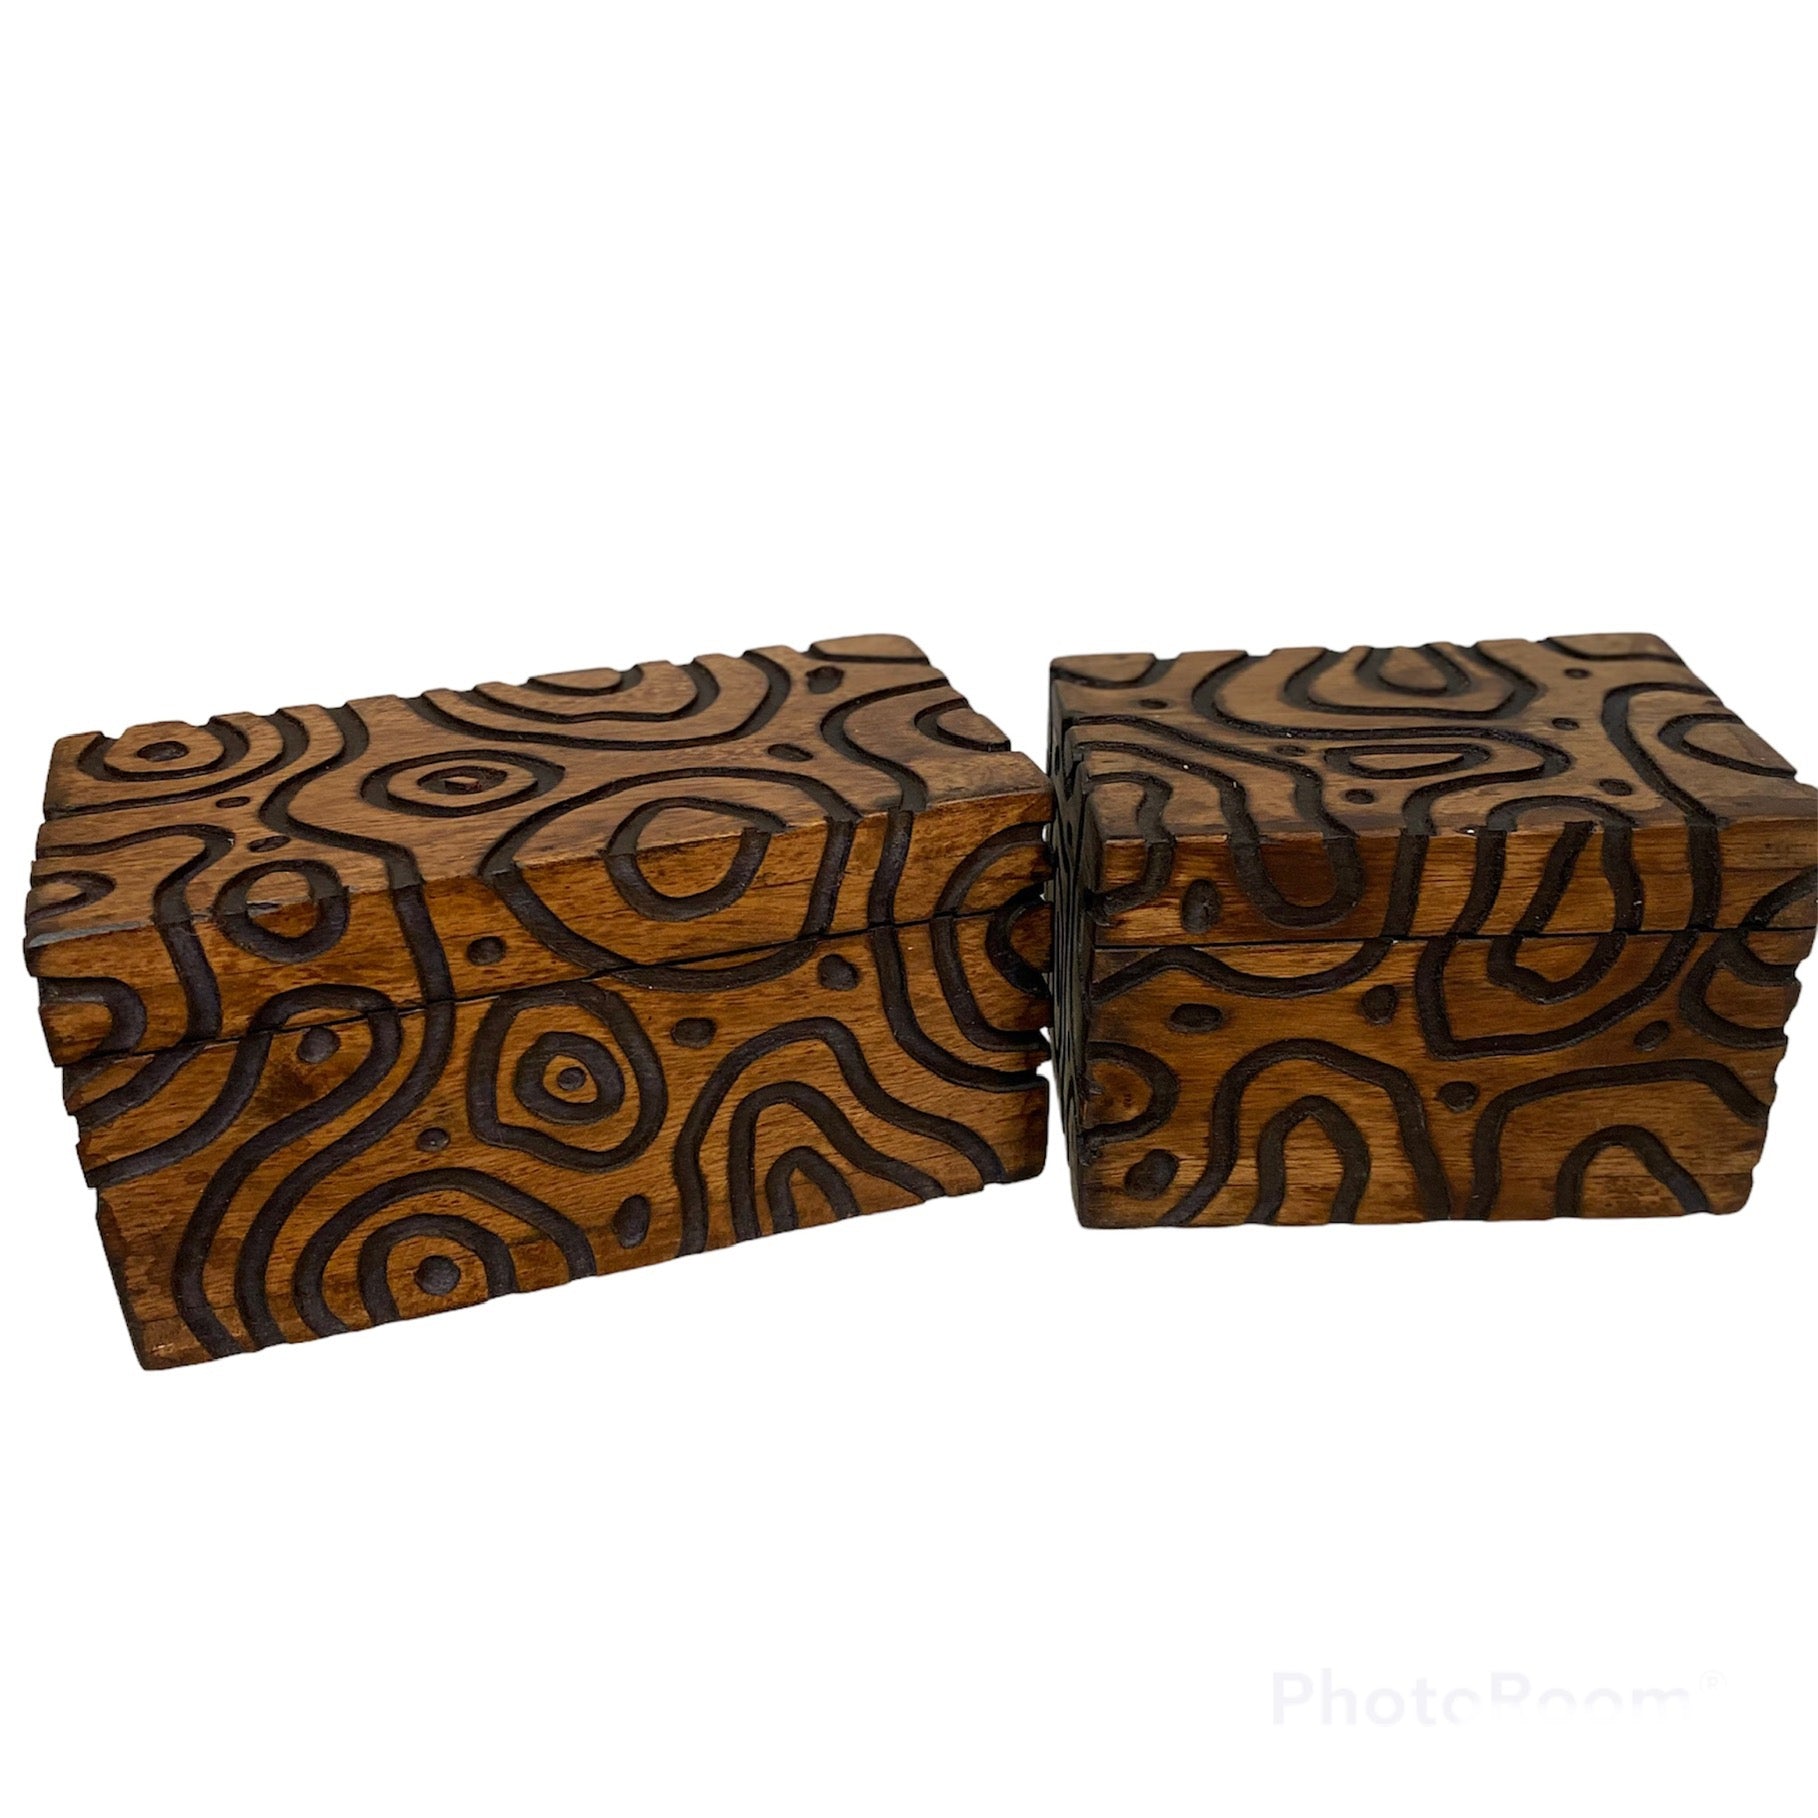 Wooden gift box, Zebra Wooden Handmade Memory Box - Wood Box for Rings Necklace Bracelets Watches Earrings - Home Living Room Decor wooden jewelry Box